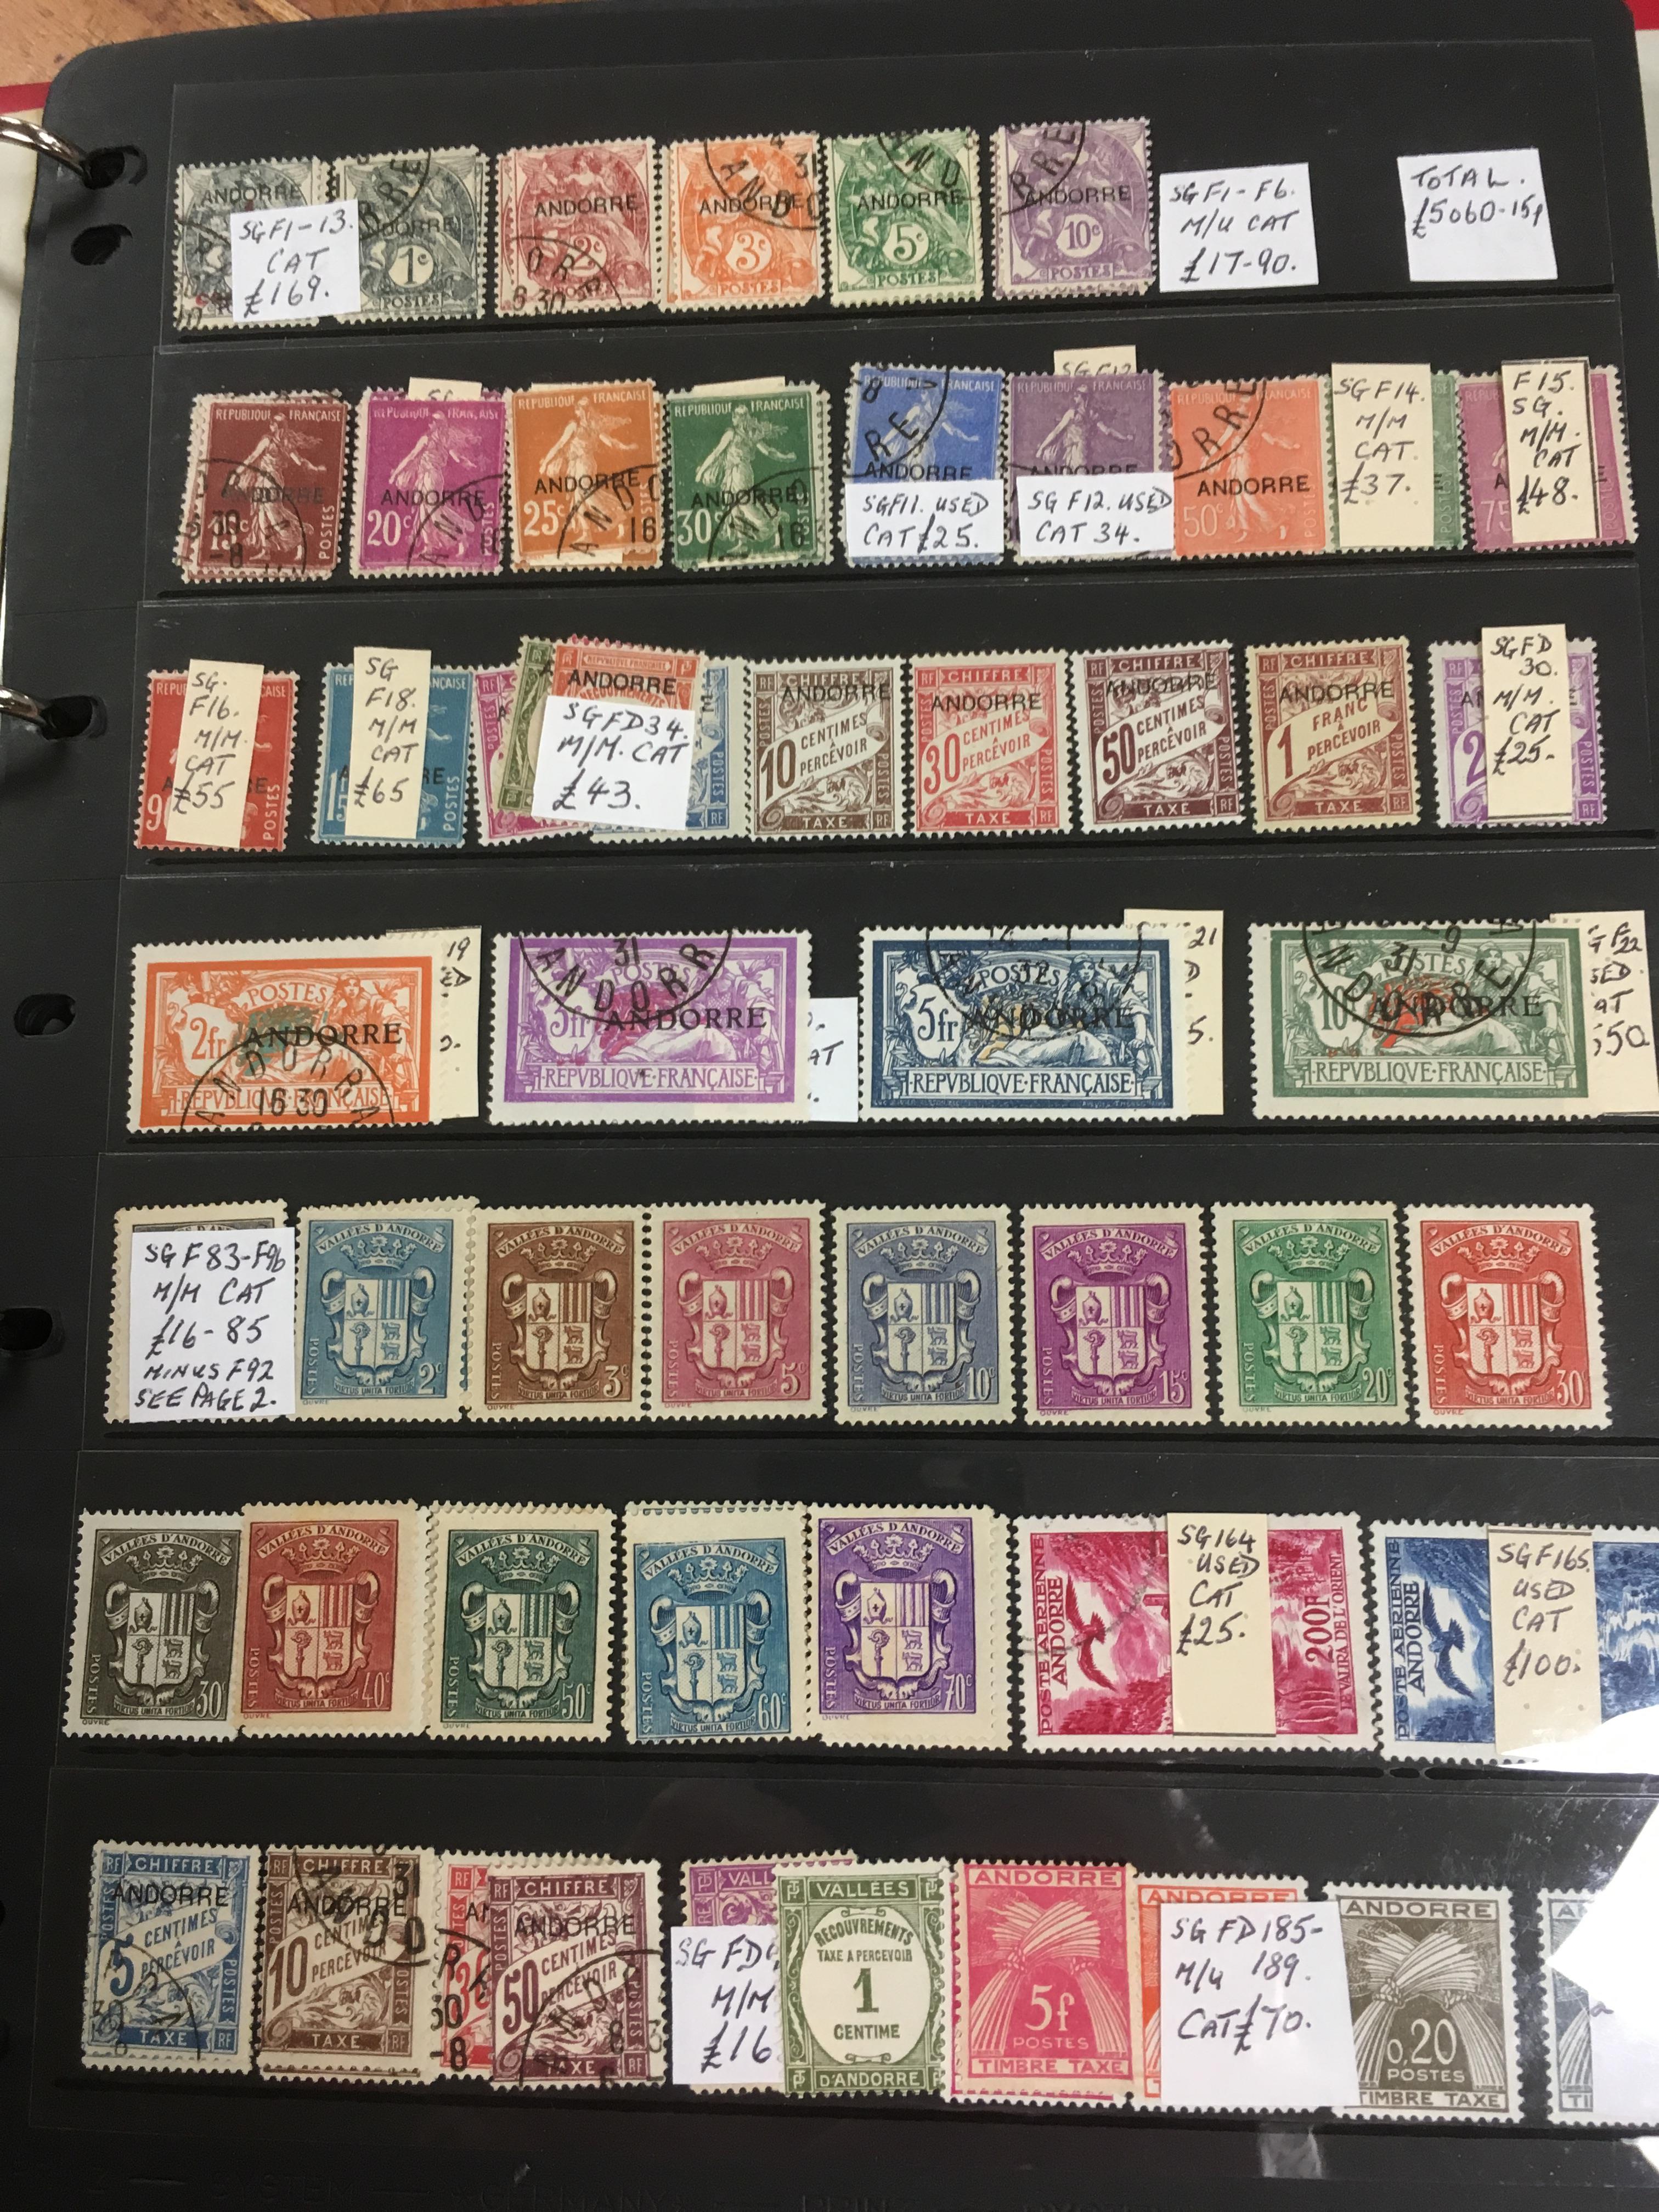 ANDORRA: 1931-2000 MIXED MINT AND USED FRENCH POST OFFICES COLLECTION IN A BINDER, BETTER ITEMS ANNO